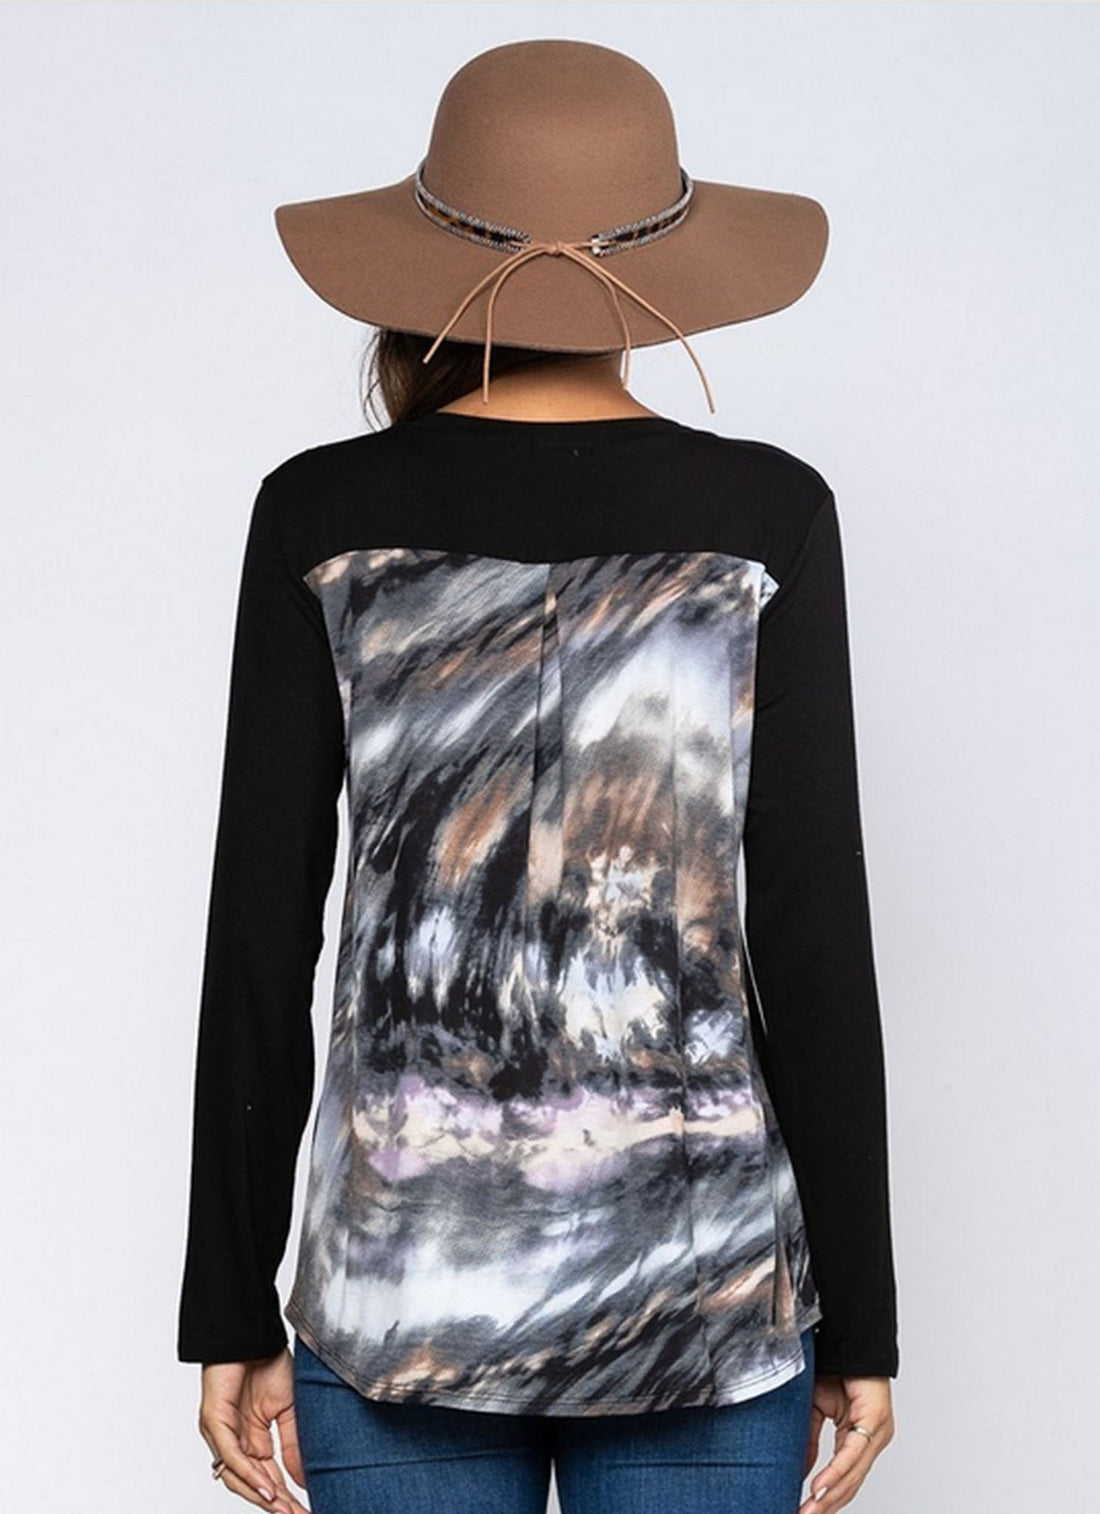 Black Top with Contrast Tie-Dye Sleeves and Pocket Detail